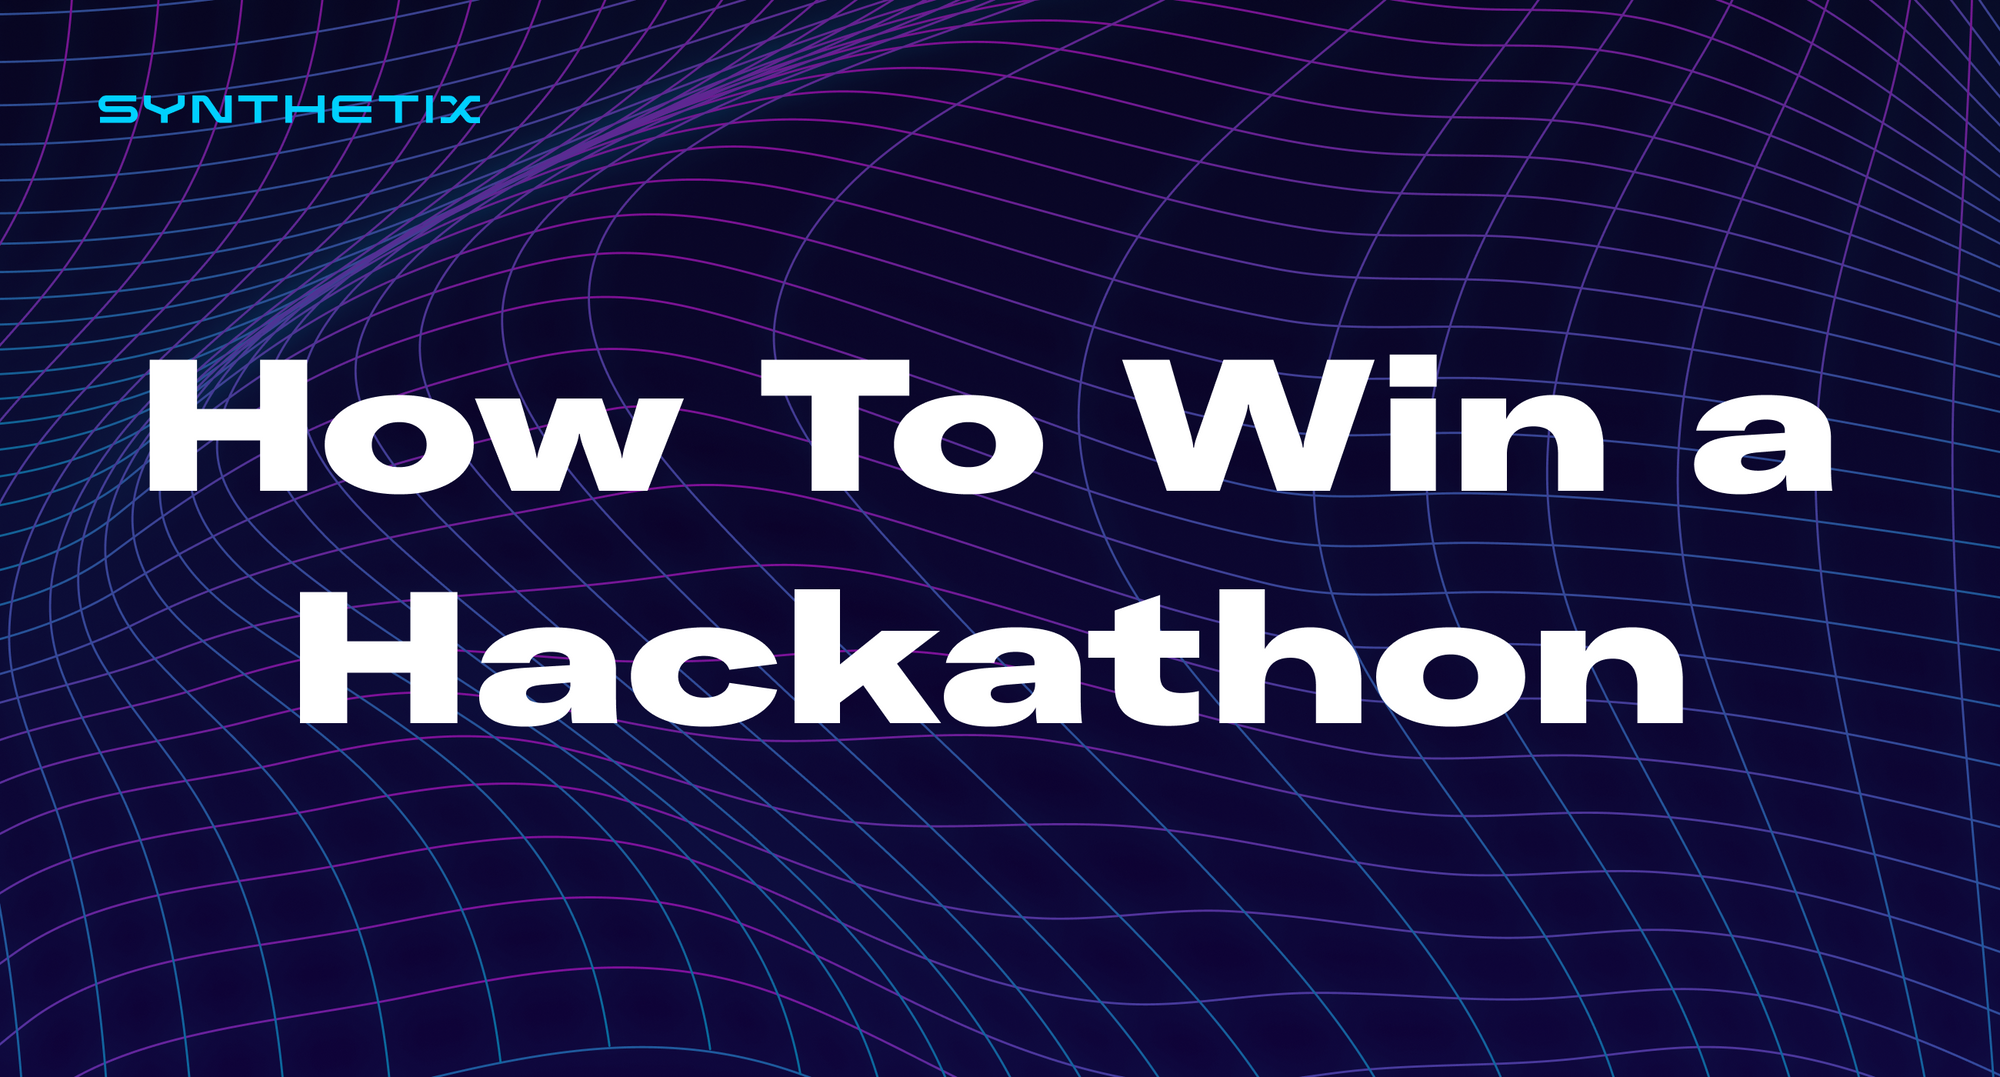 How to win a Hackathon by CC Mark